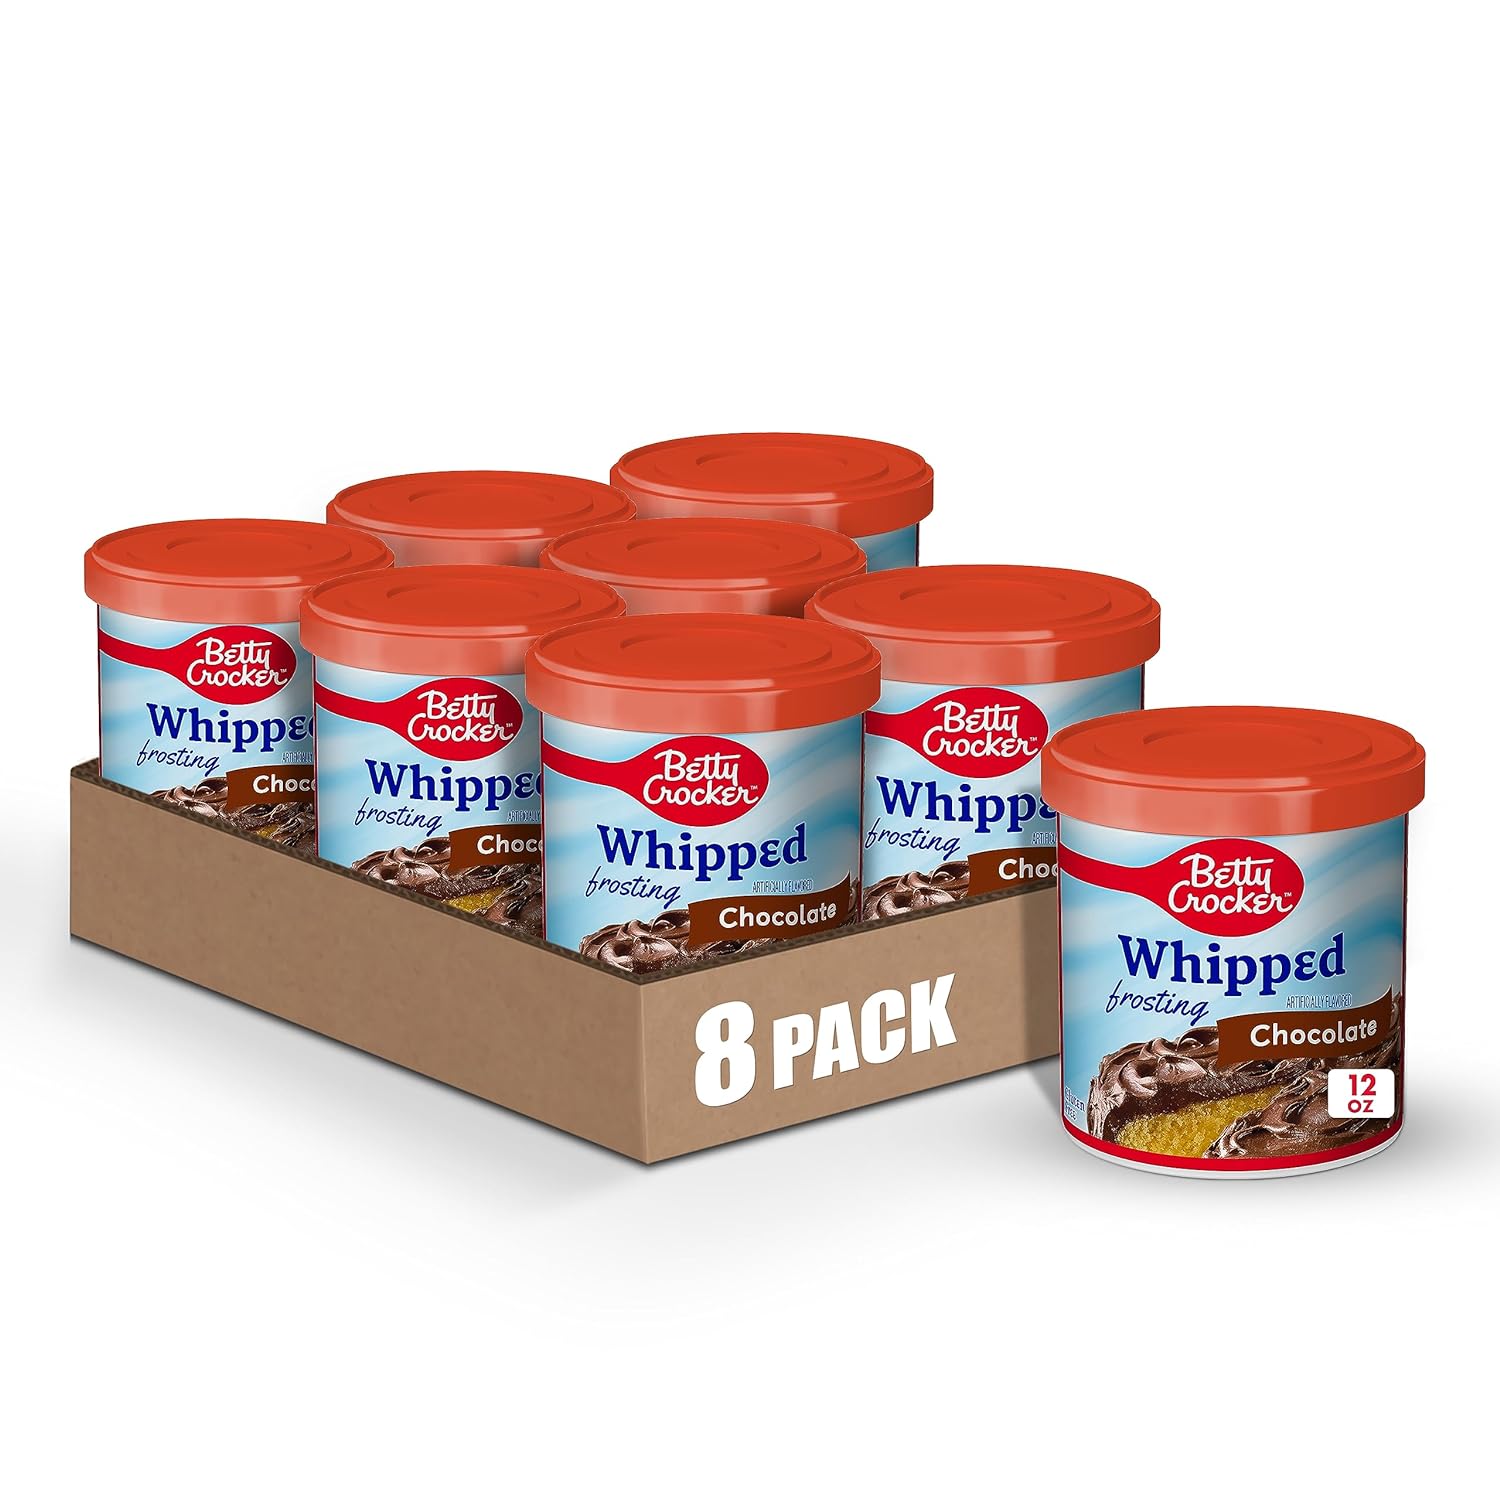 Betty Crocker Gluten Free Whipped Chocolate Frosting, 12 oz. (Pack of 8)